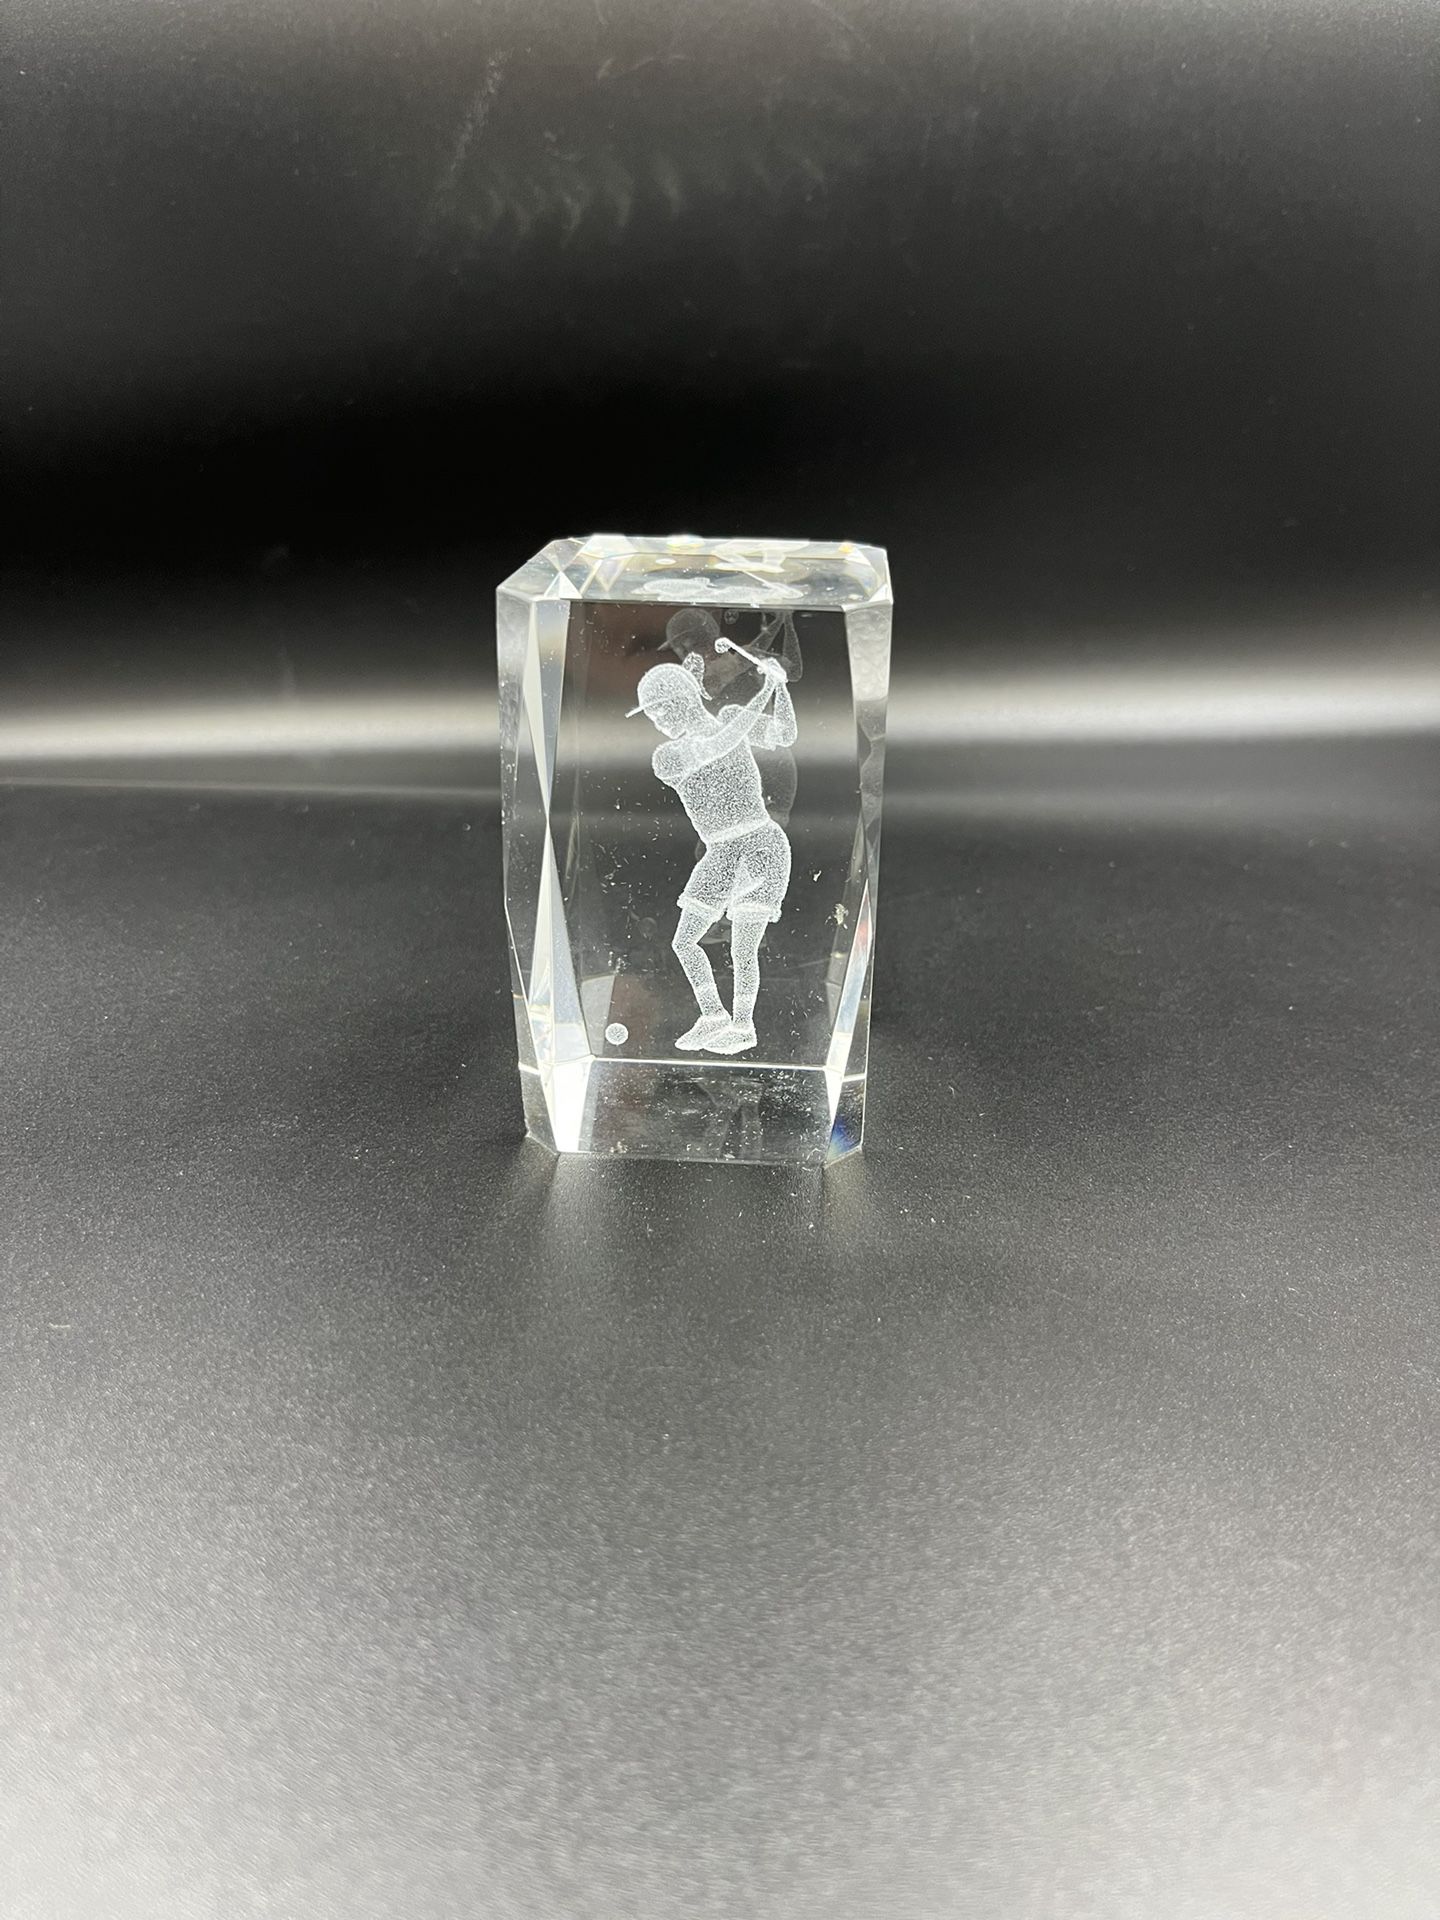 Golf player 3D Laser Engraved on Crystal Paperweight Luxury Gifts Home Decoration